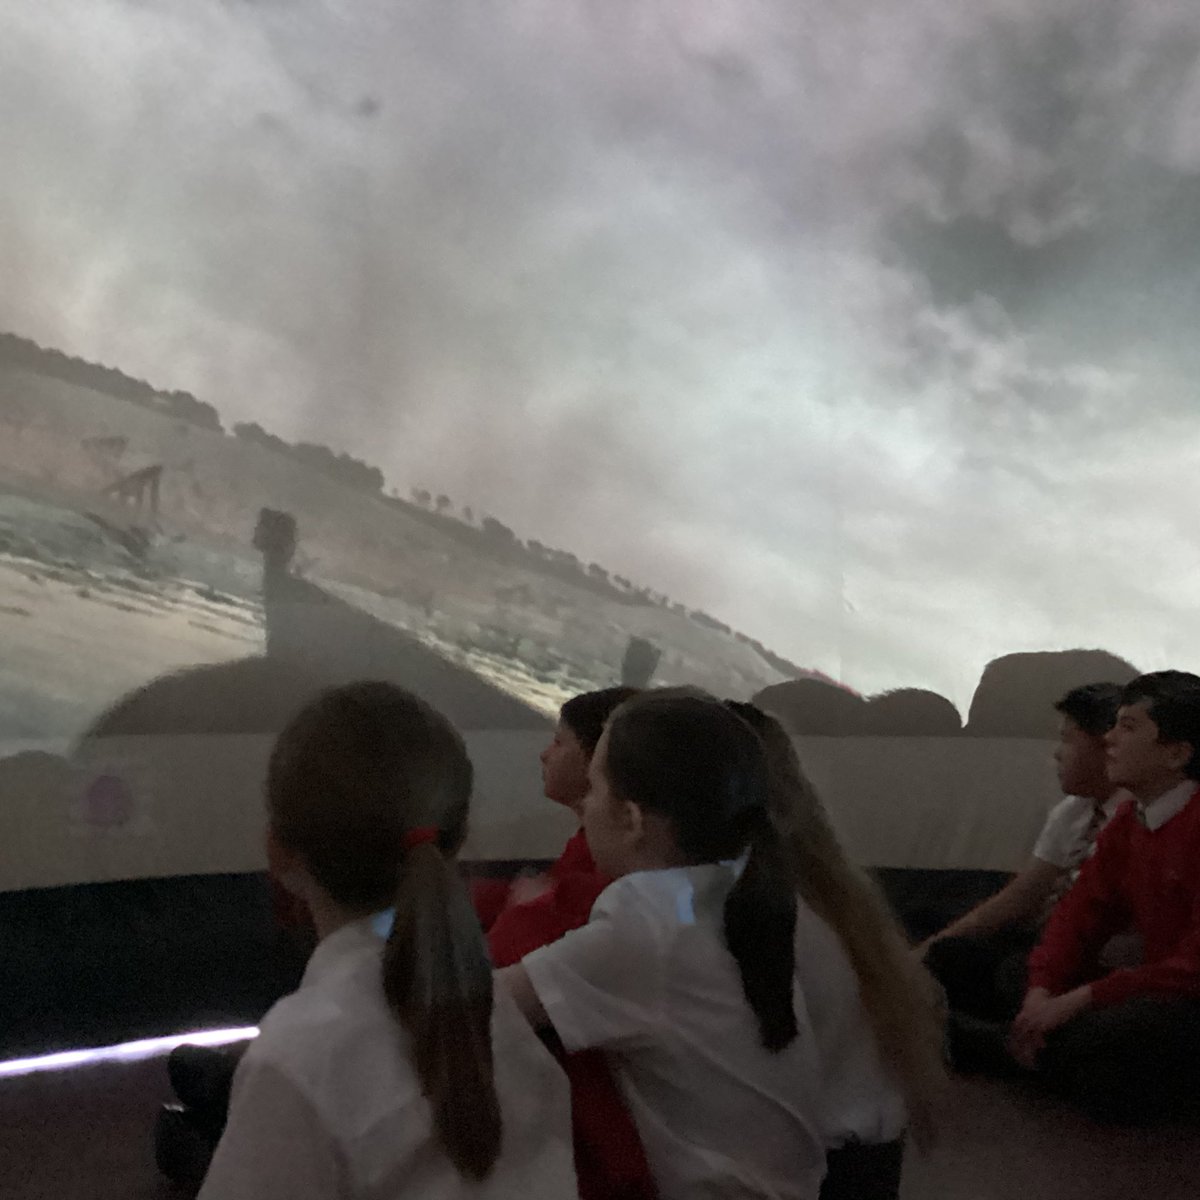 What an amazing experience! Year 6 were hooked on WW2 after watching all the major events that took place in 360 degrees! 🪖 We cannot wait to get started on our writing journey after this day. ✍️